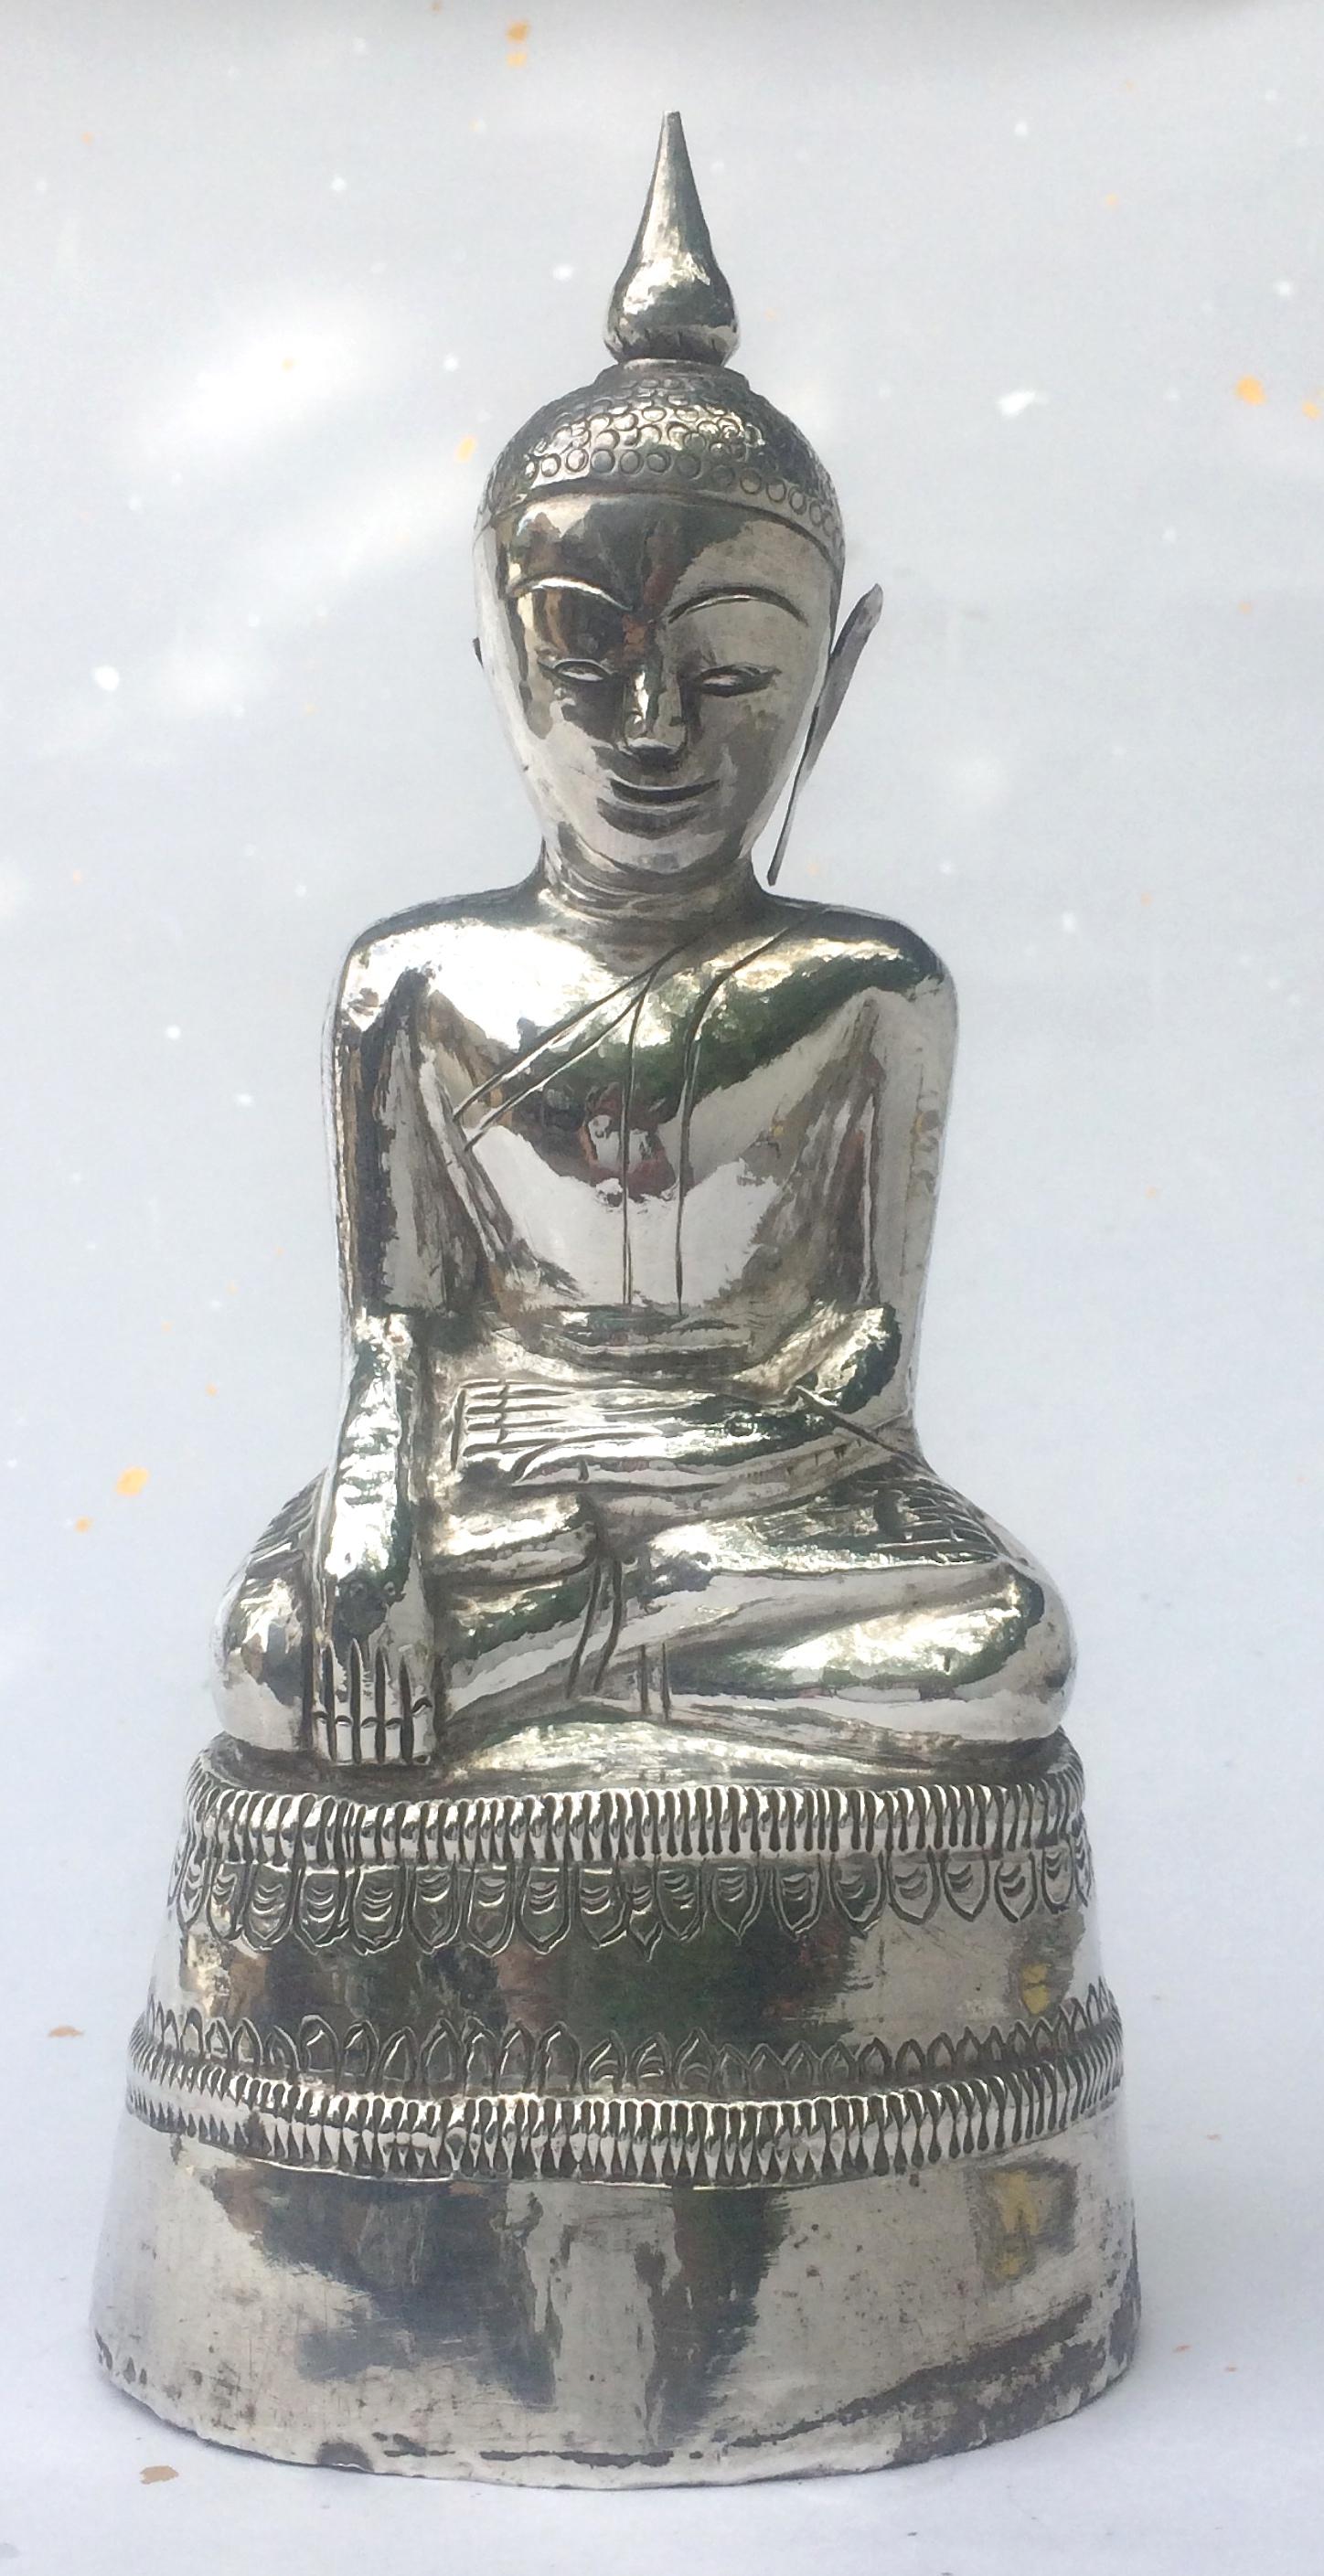 Burmese Silver Buddha, crafted of sheet silver over a composite clay core, depicted in padmasana with the hands in the bhumisparsa mudra seated on top of a two tiered base with edge incised decoration, the etched decoration on the image includes